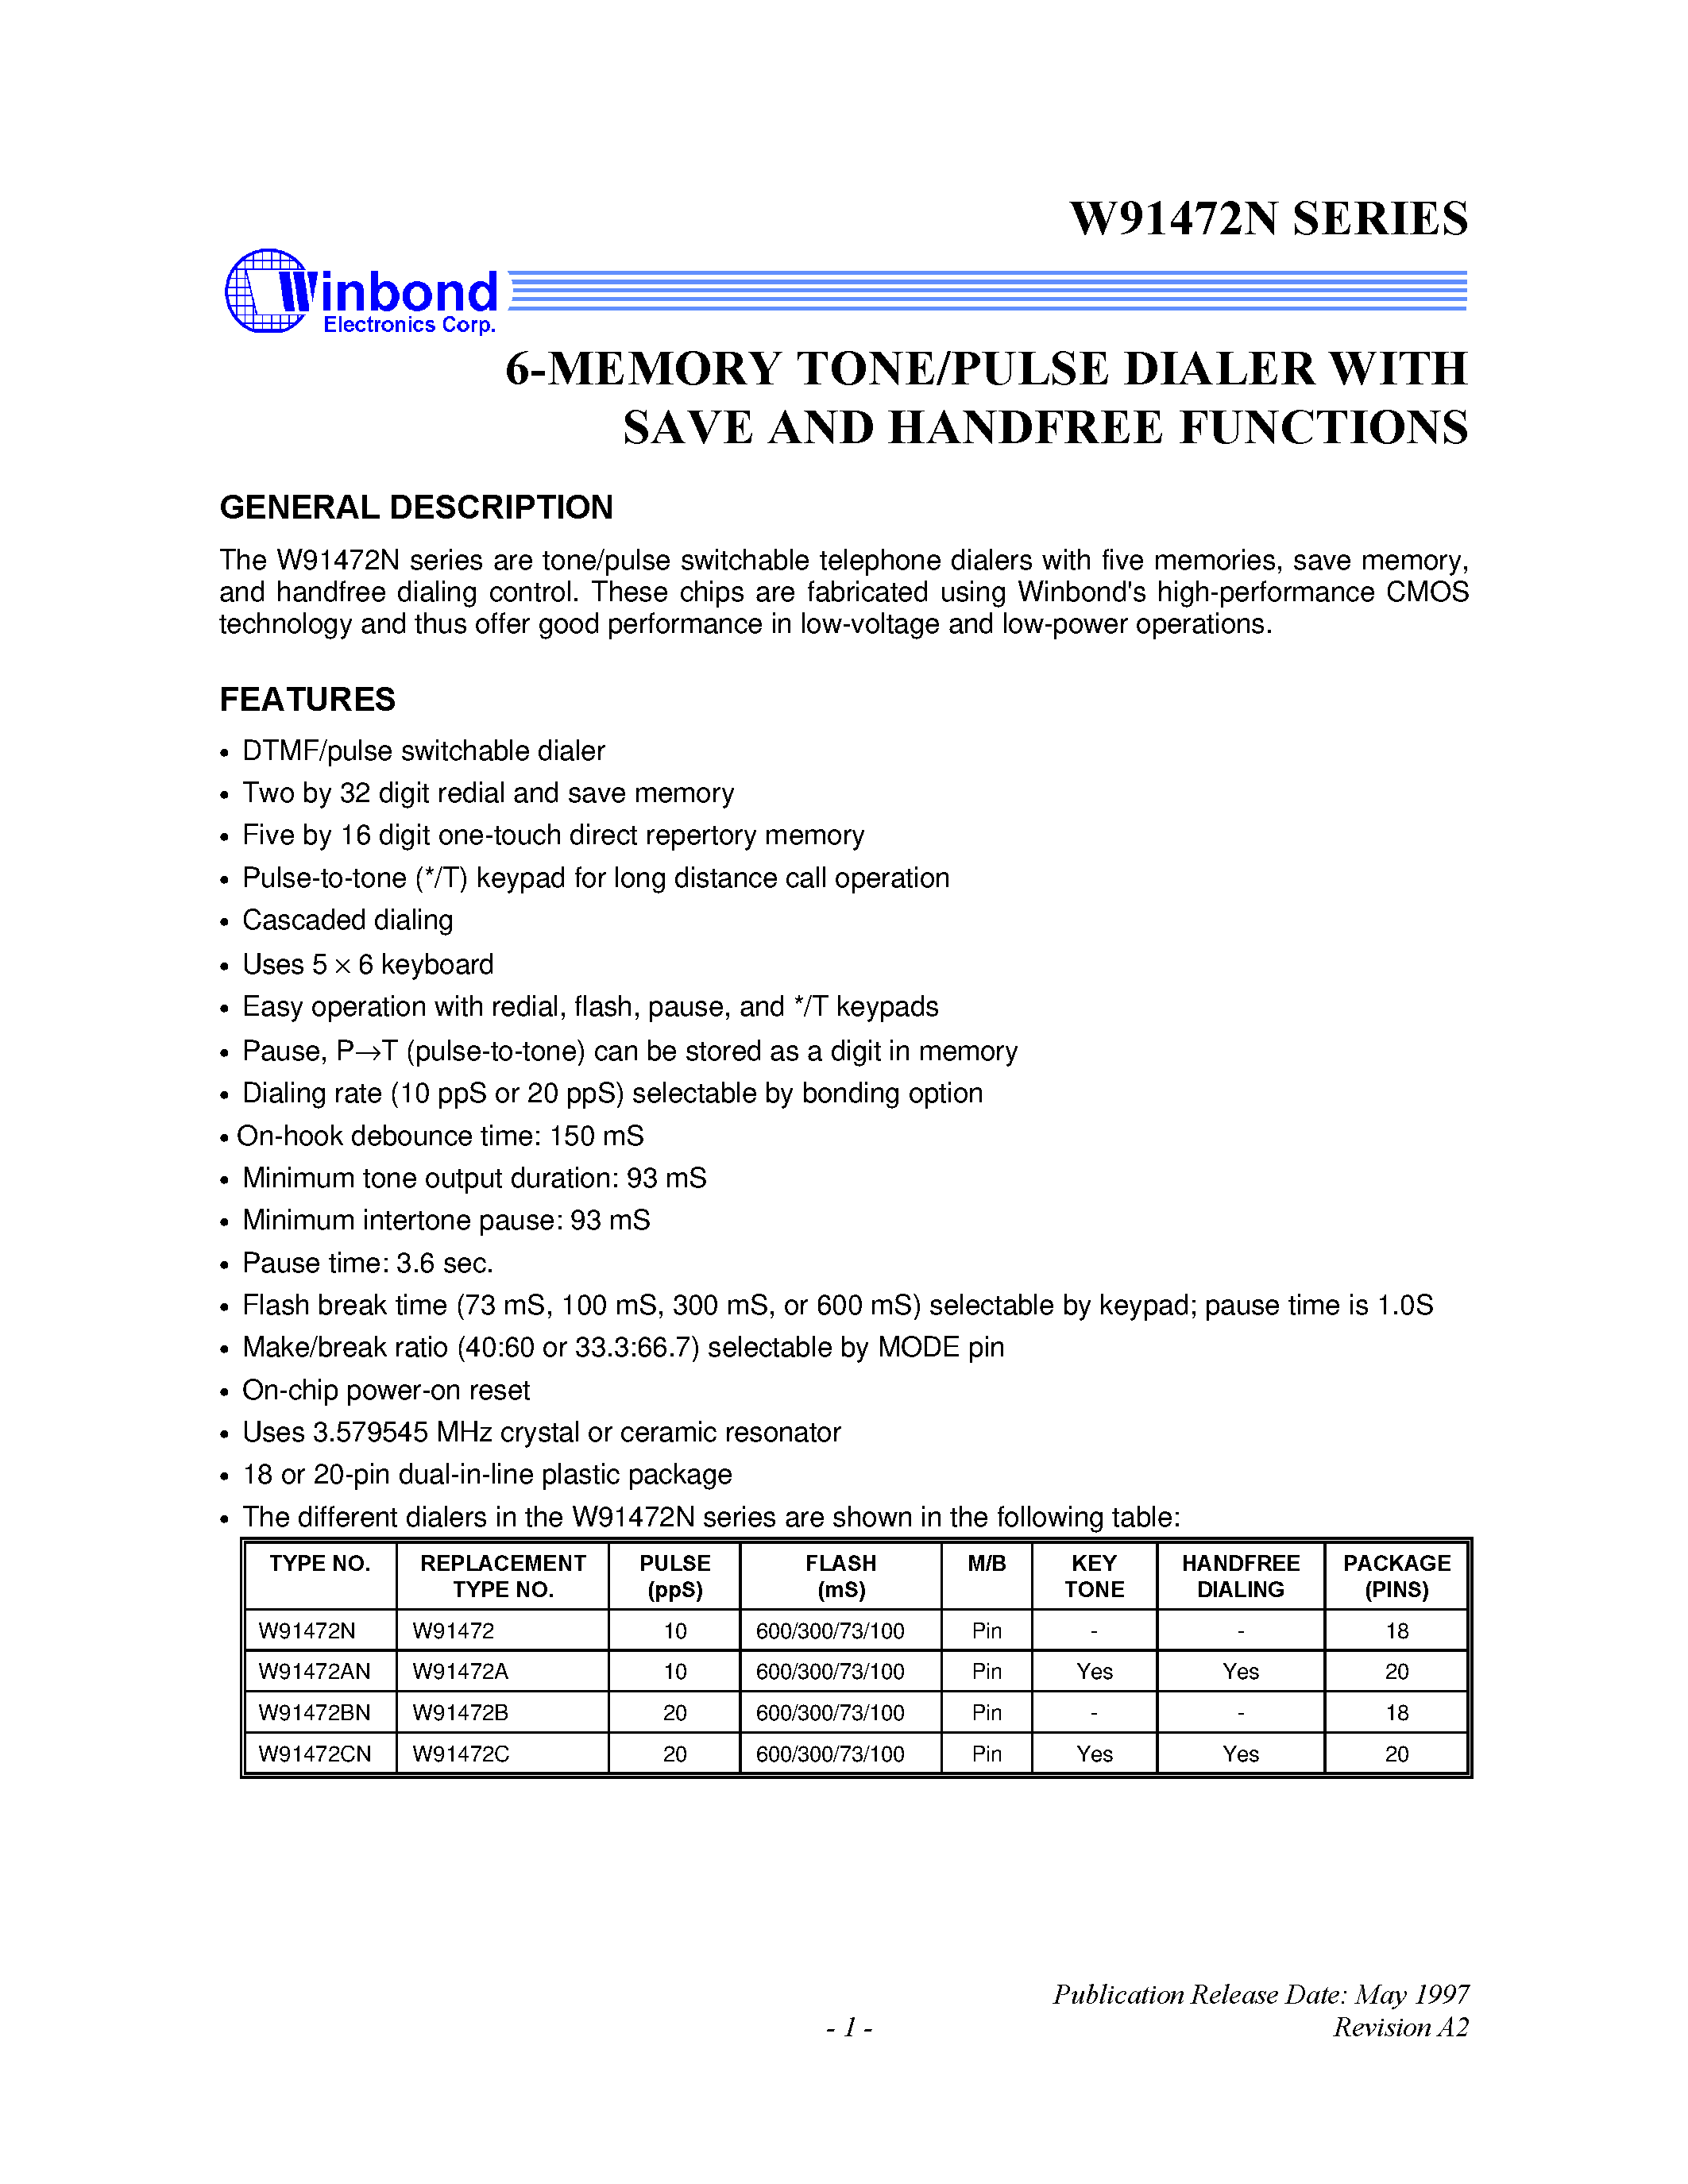 Datasheet W91472N - 6-MEMORY TONE/PULSE DIALER WITH SAVE AND HANDFREE FUNCTION page 1